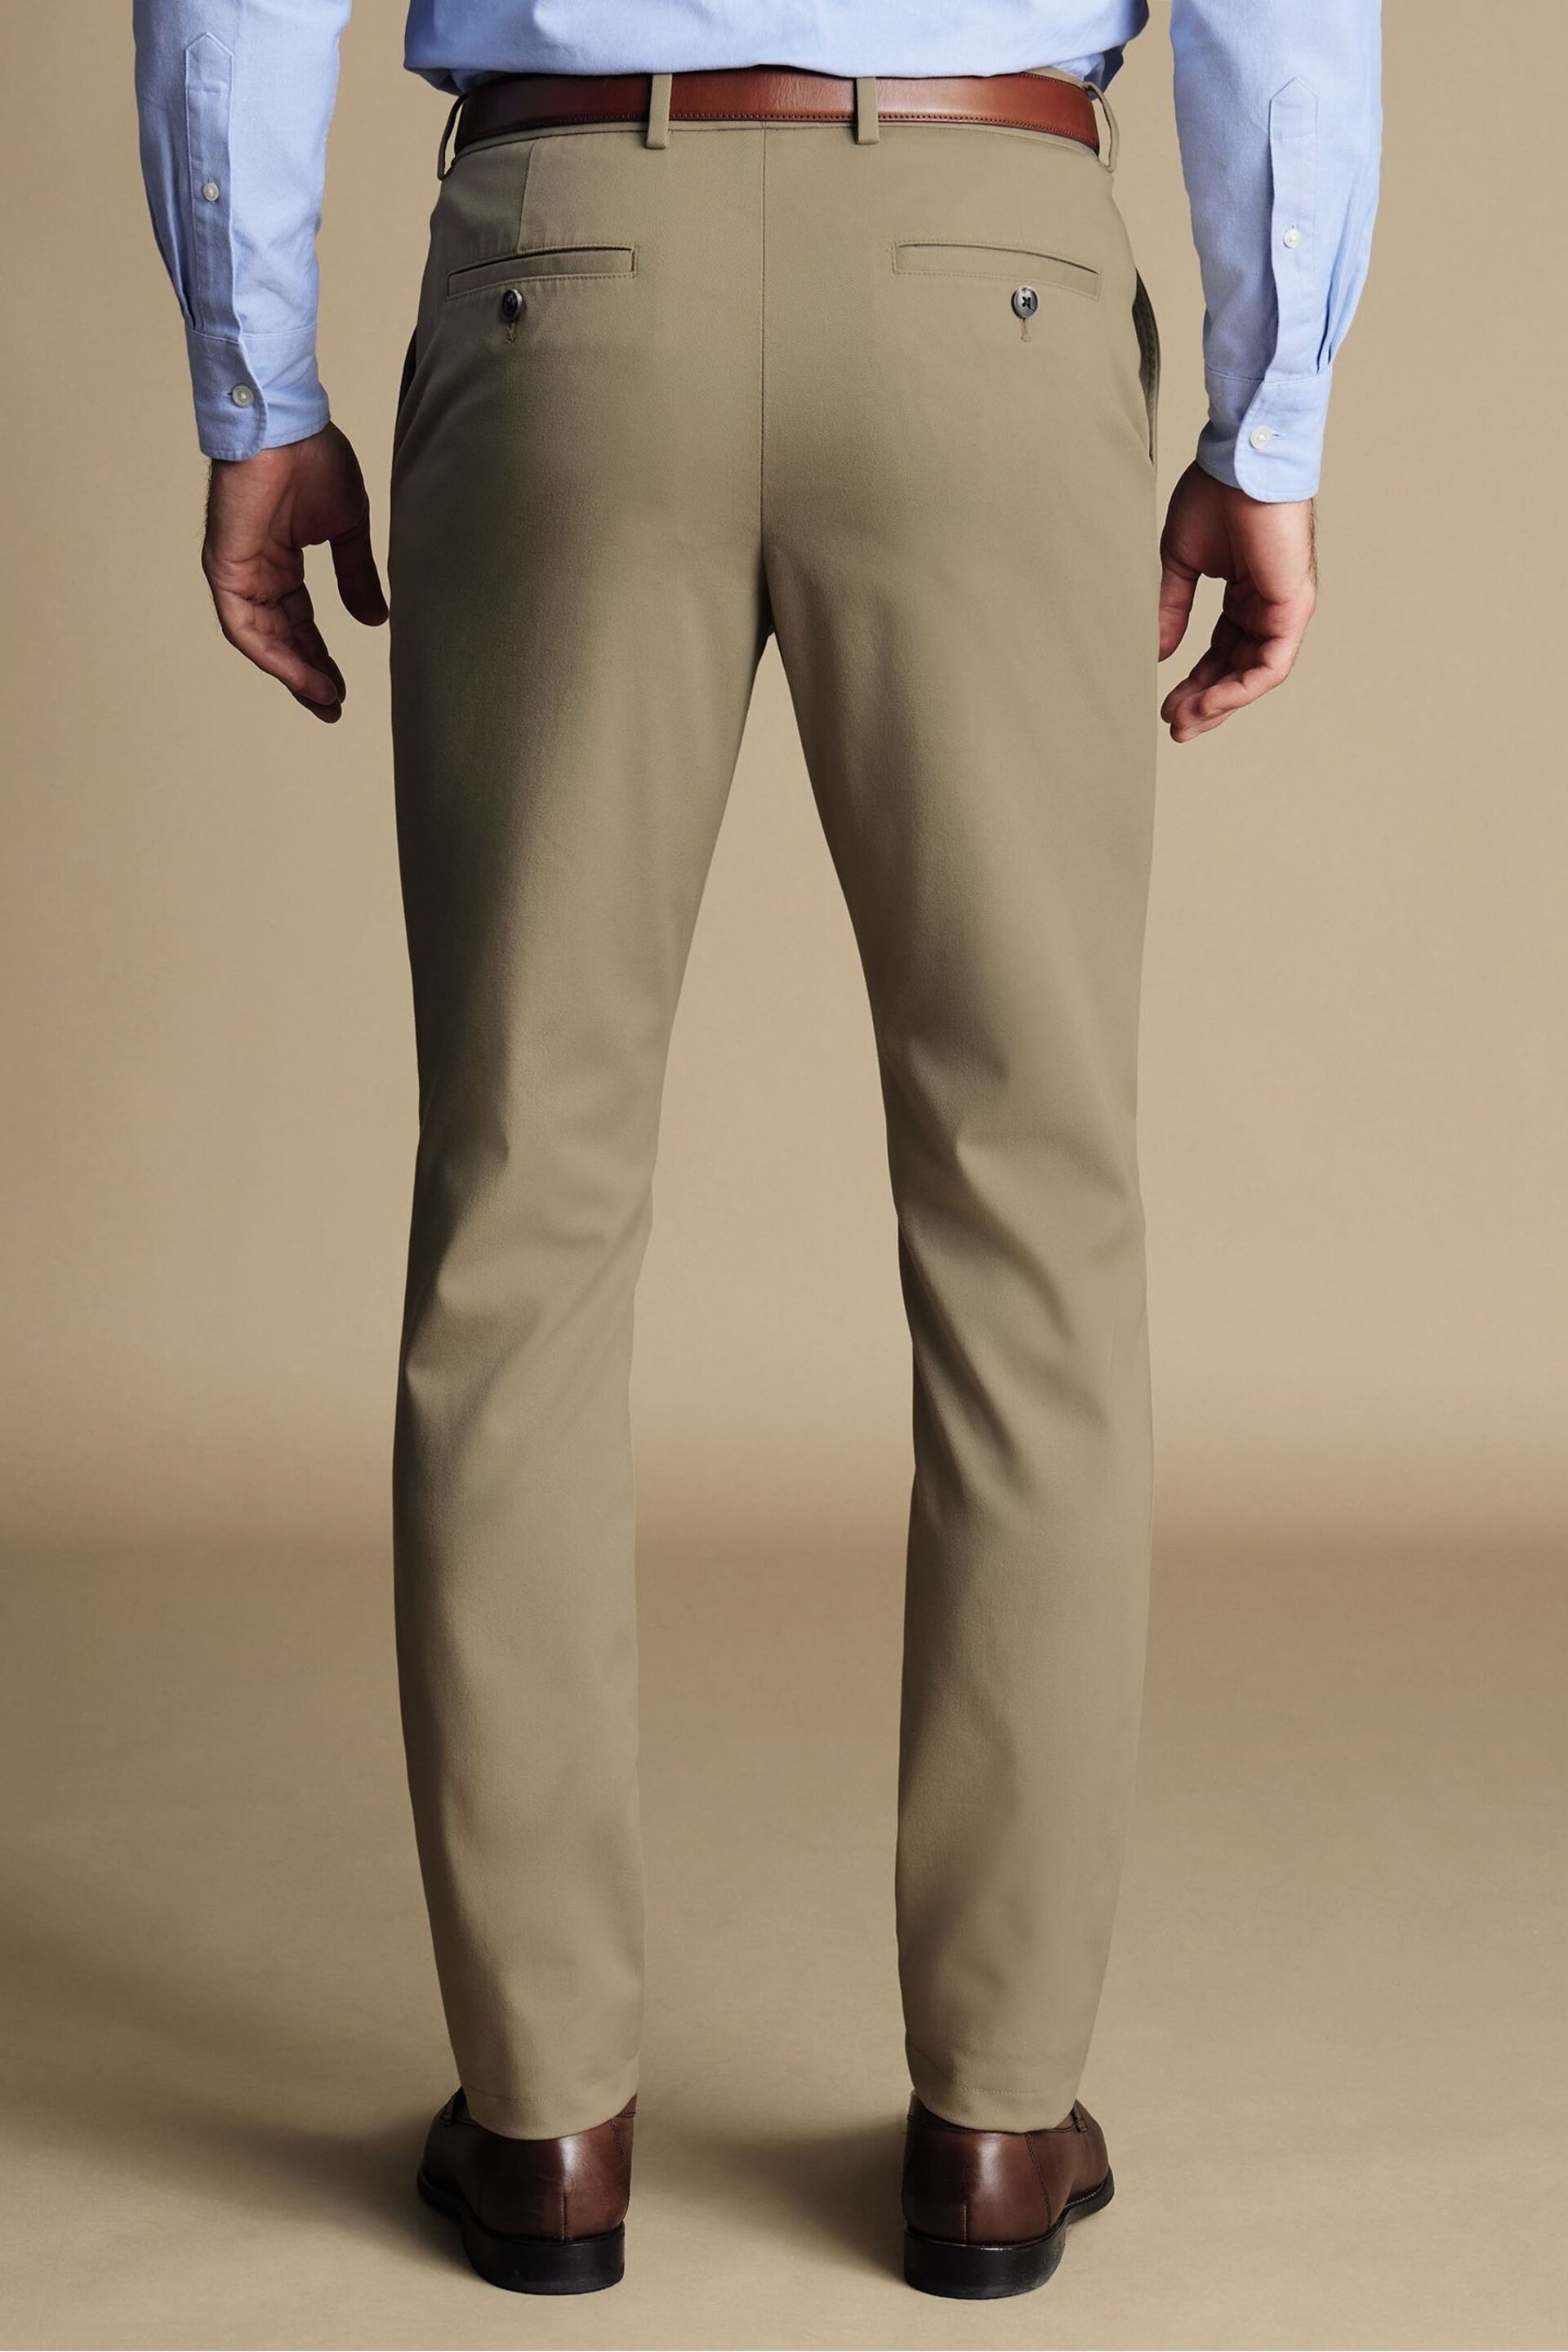 Charles Tyrwhitt Natural Slim Fit Ultimate non-iron Chino Trousers - Image 2 of 5